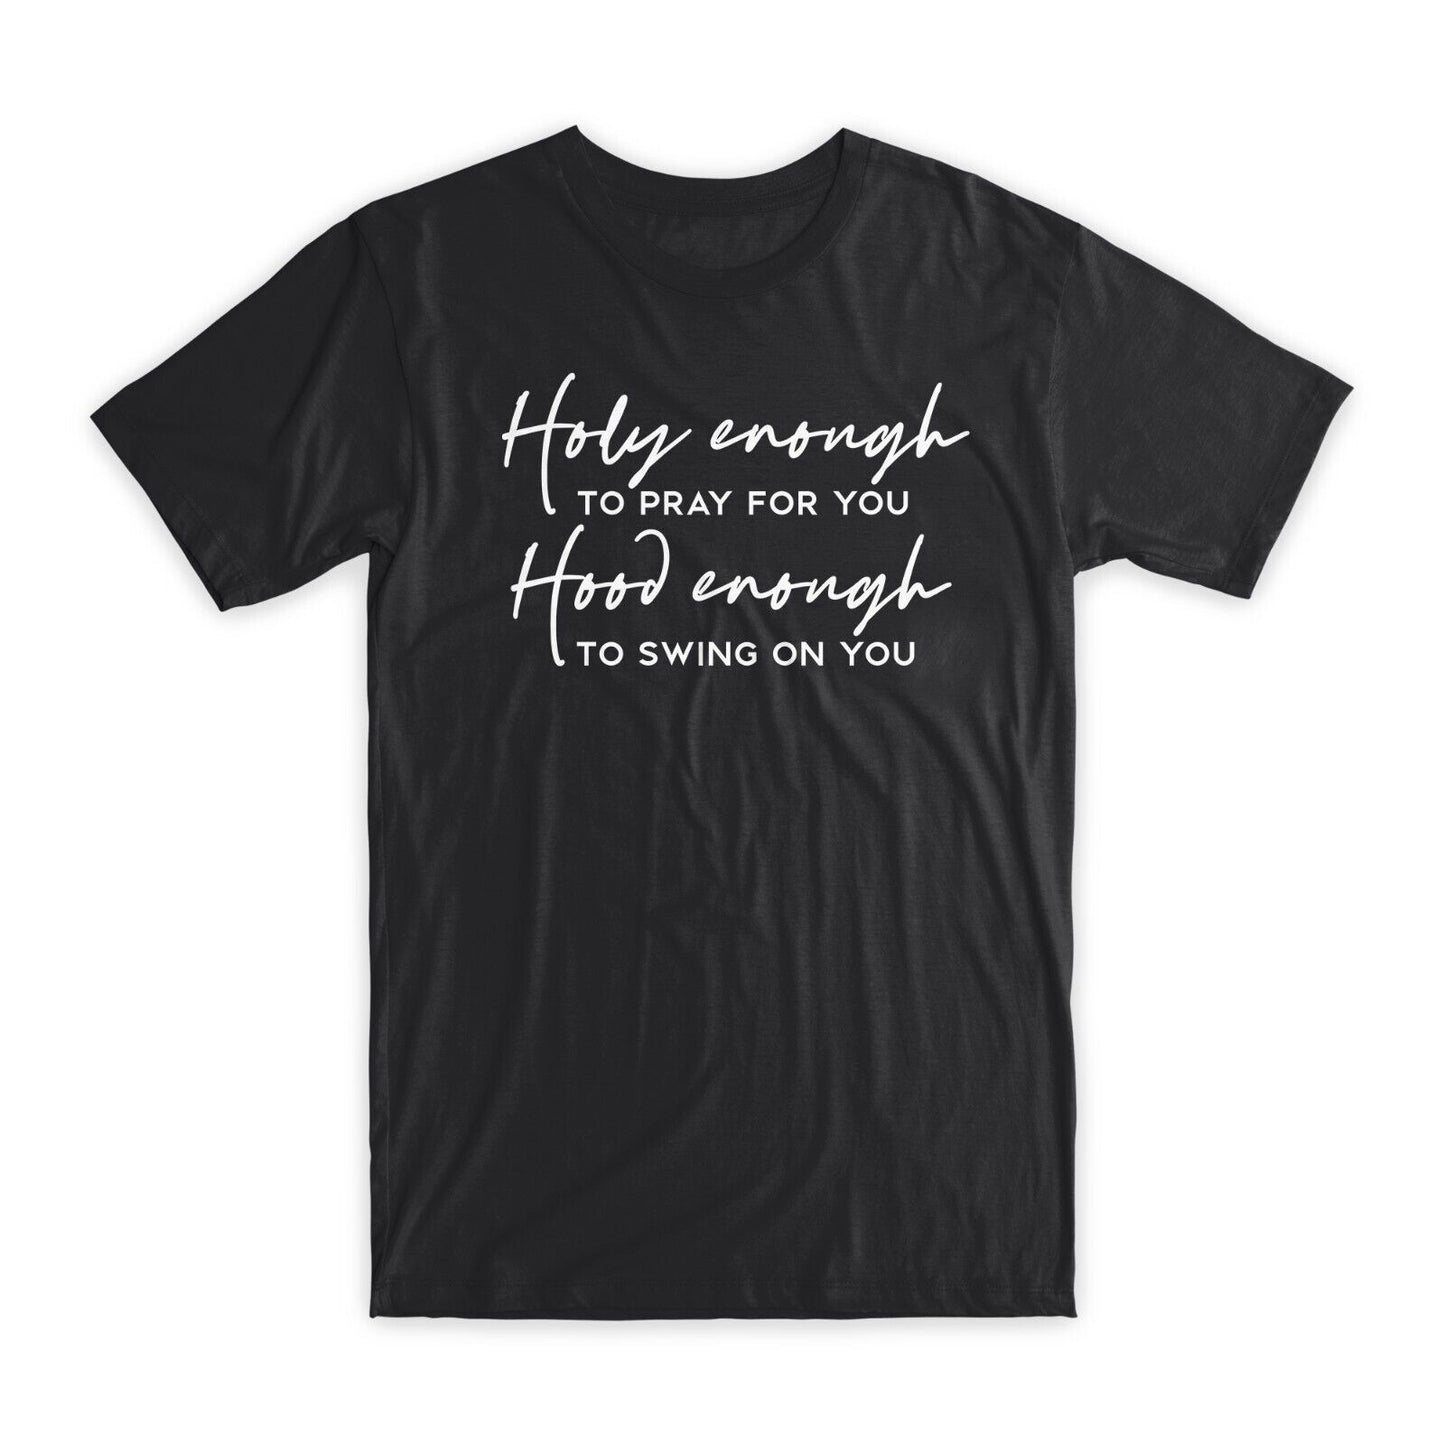 Holy Enough To Pray for You T-Shirt Premium Cotton Crew Neck Funny Tees Gift NEW